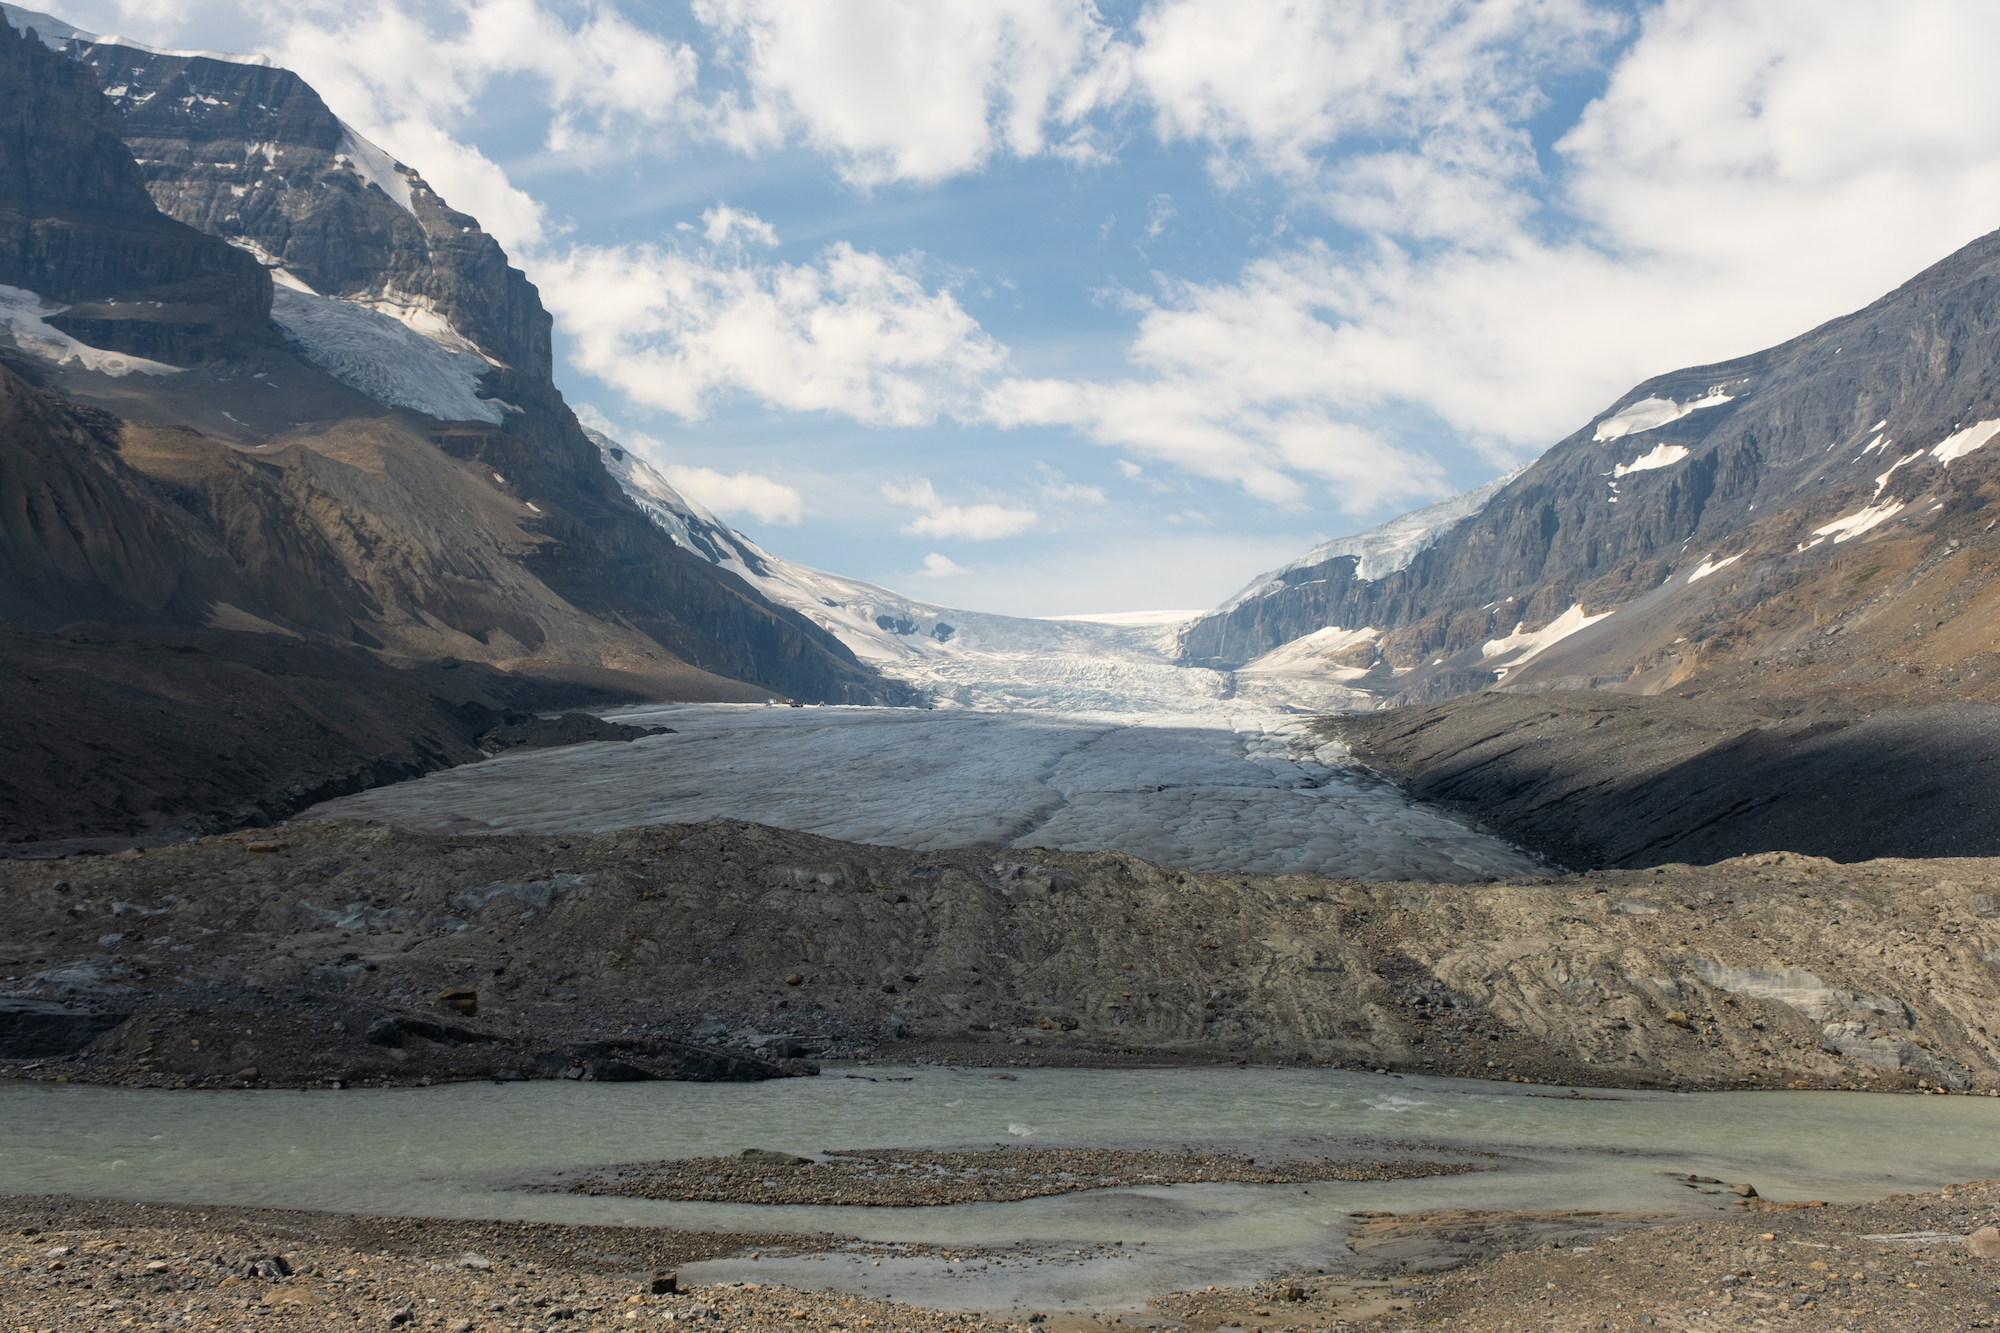 Hike to the Toe of the Glacier